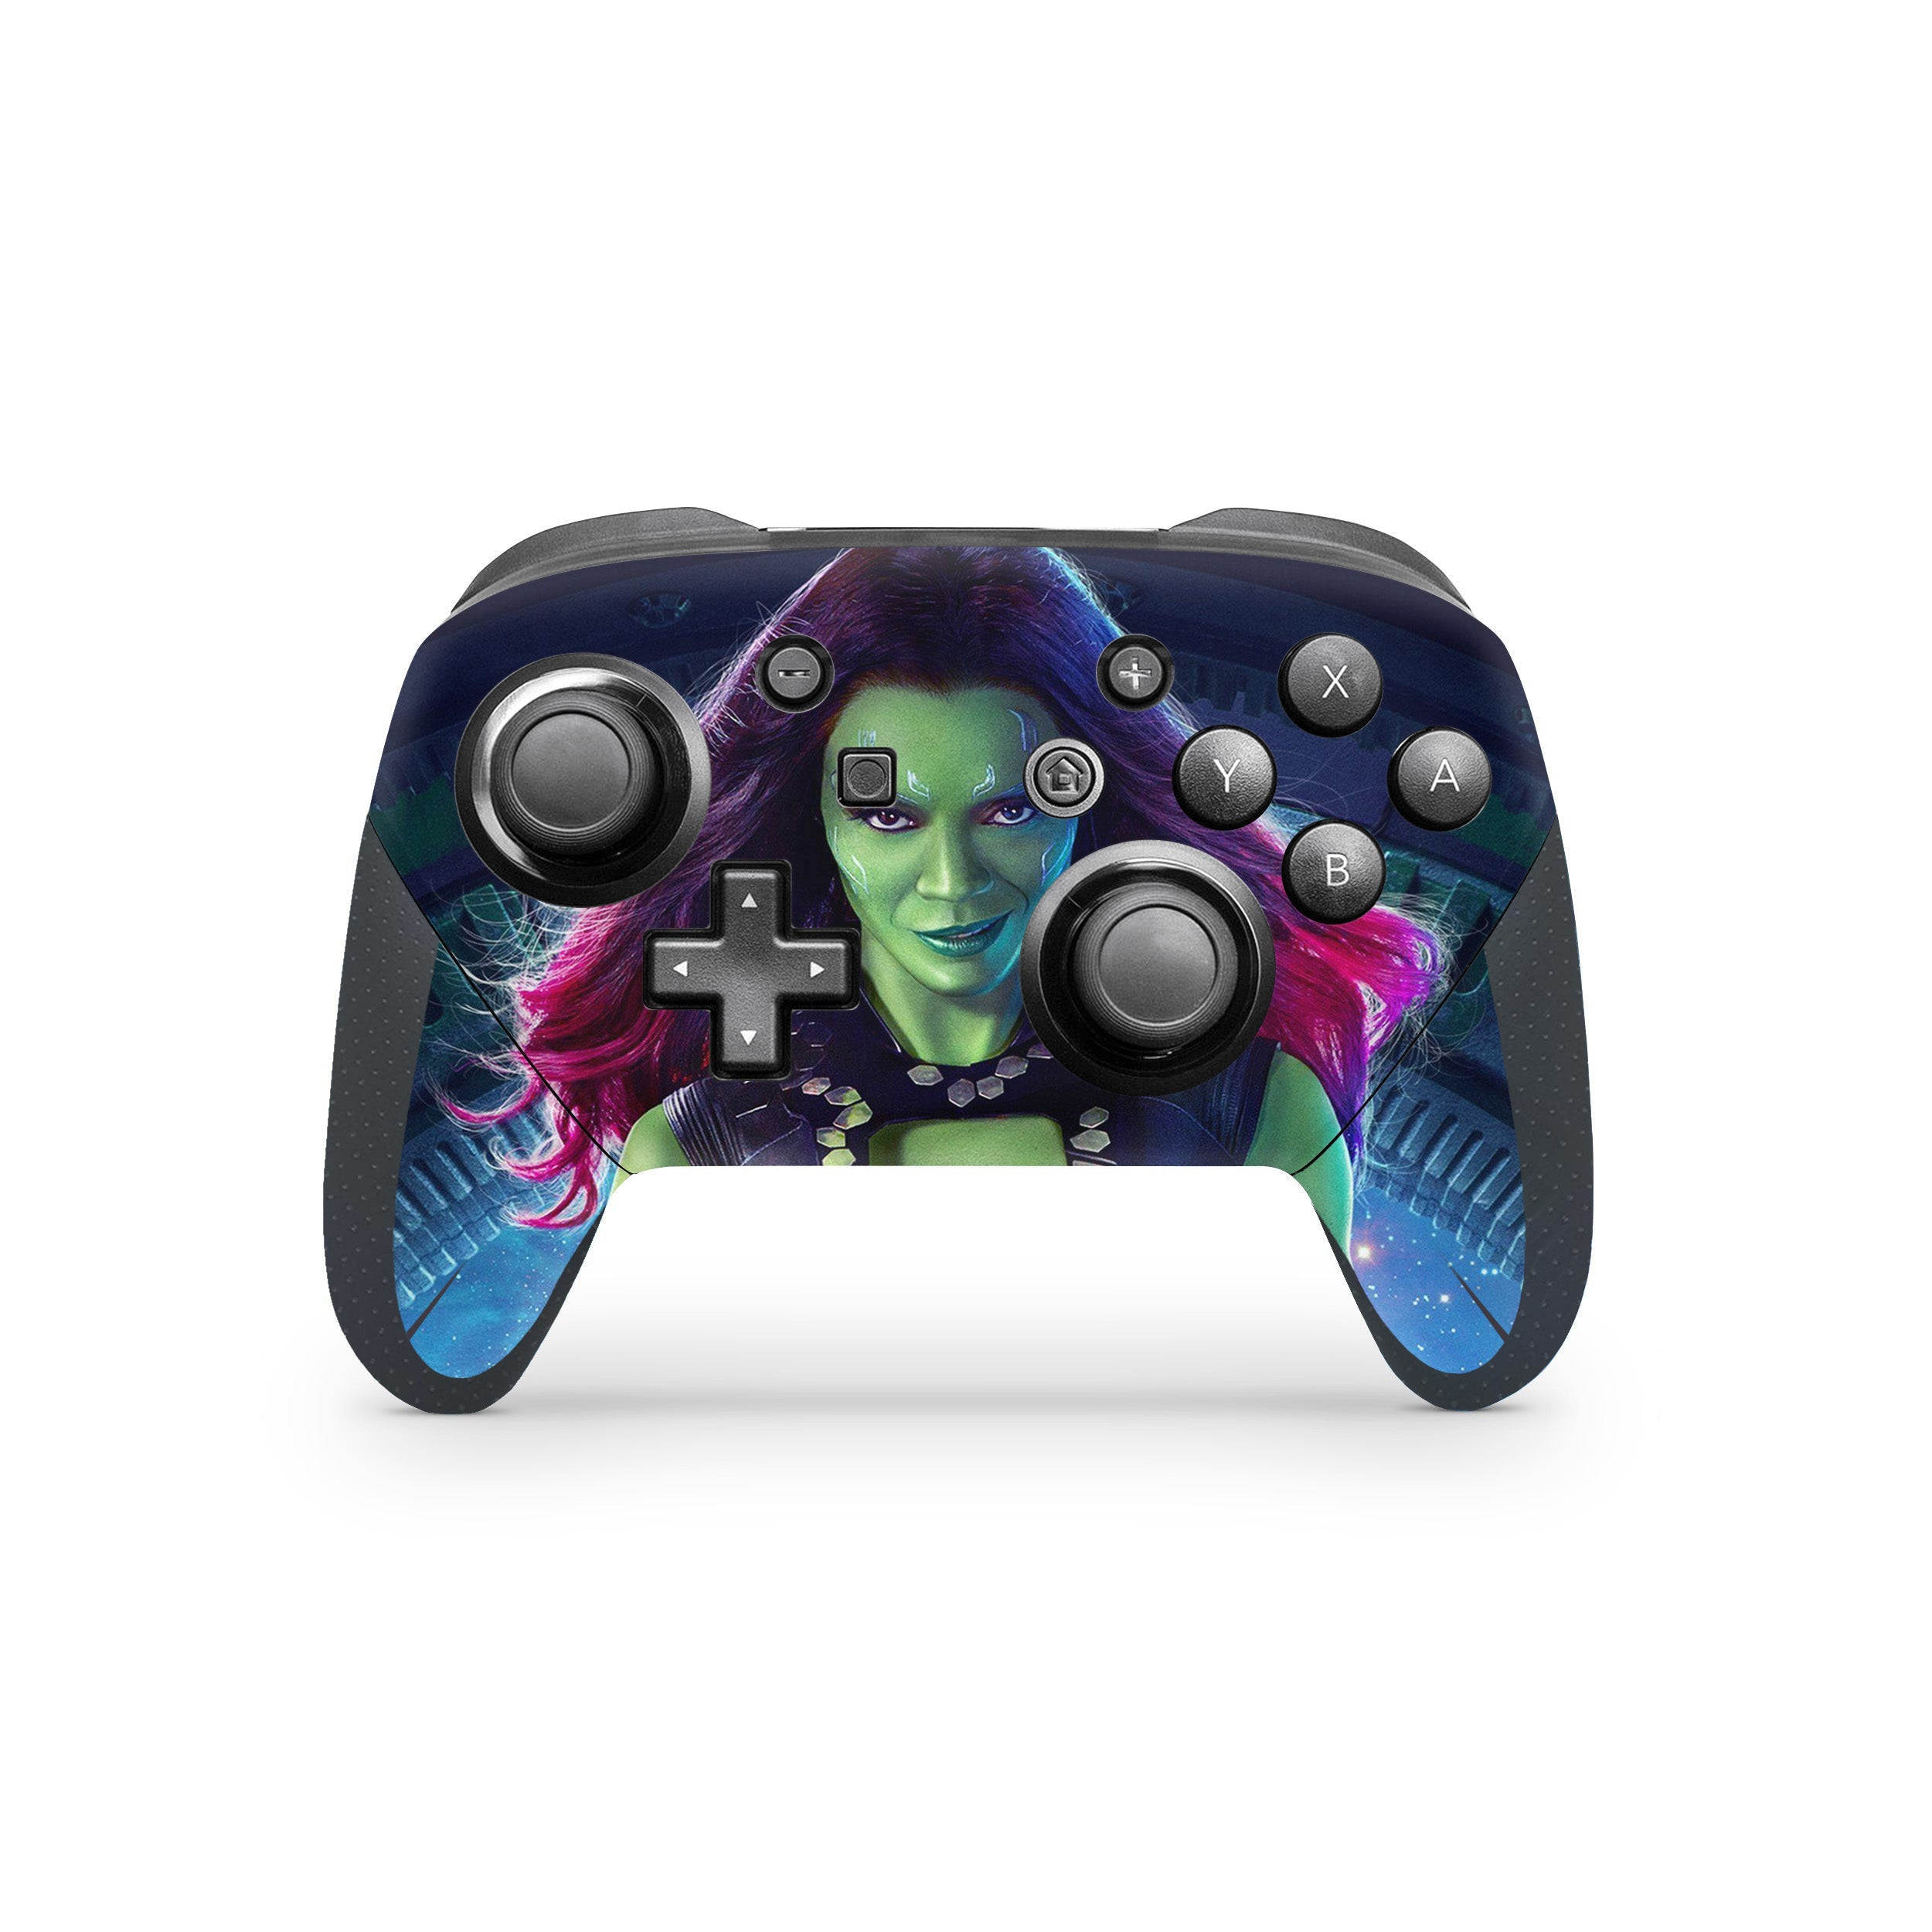 A video game skin featuring a Marvel Guardians of the Galaxy Gamora design for the Switch Pro Controller.